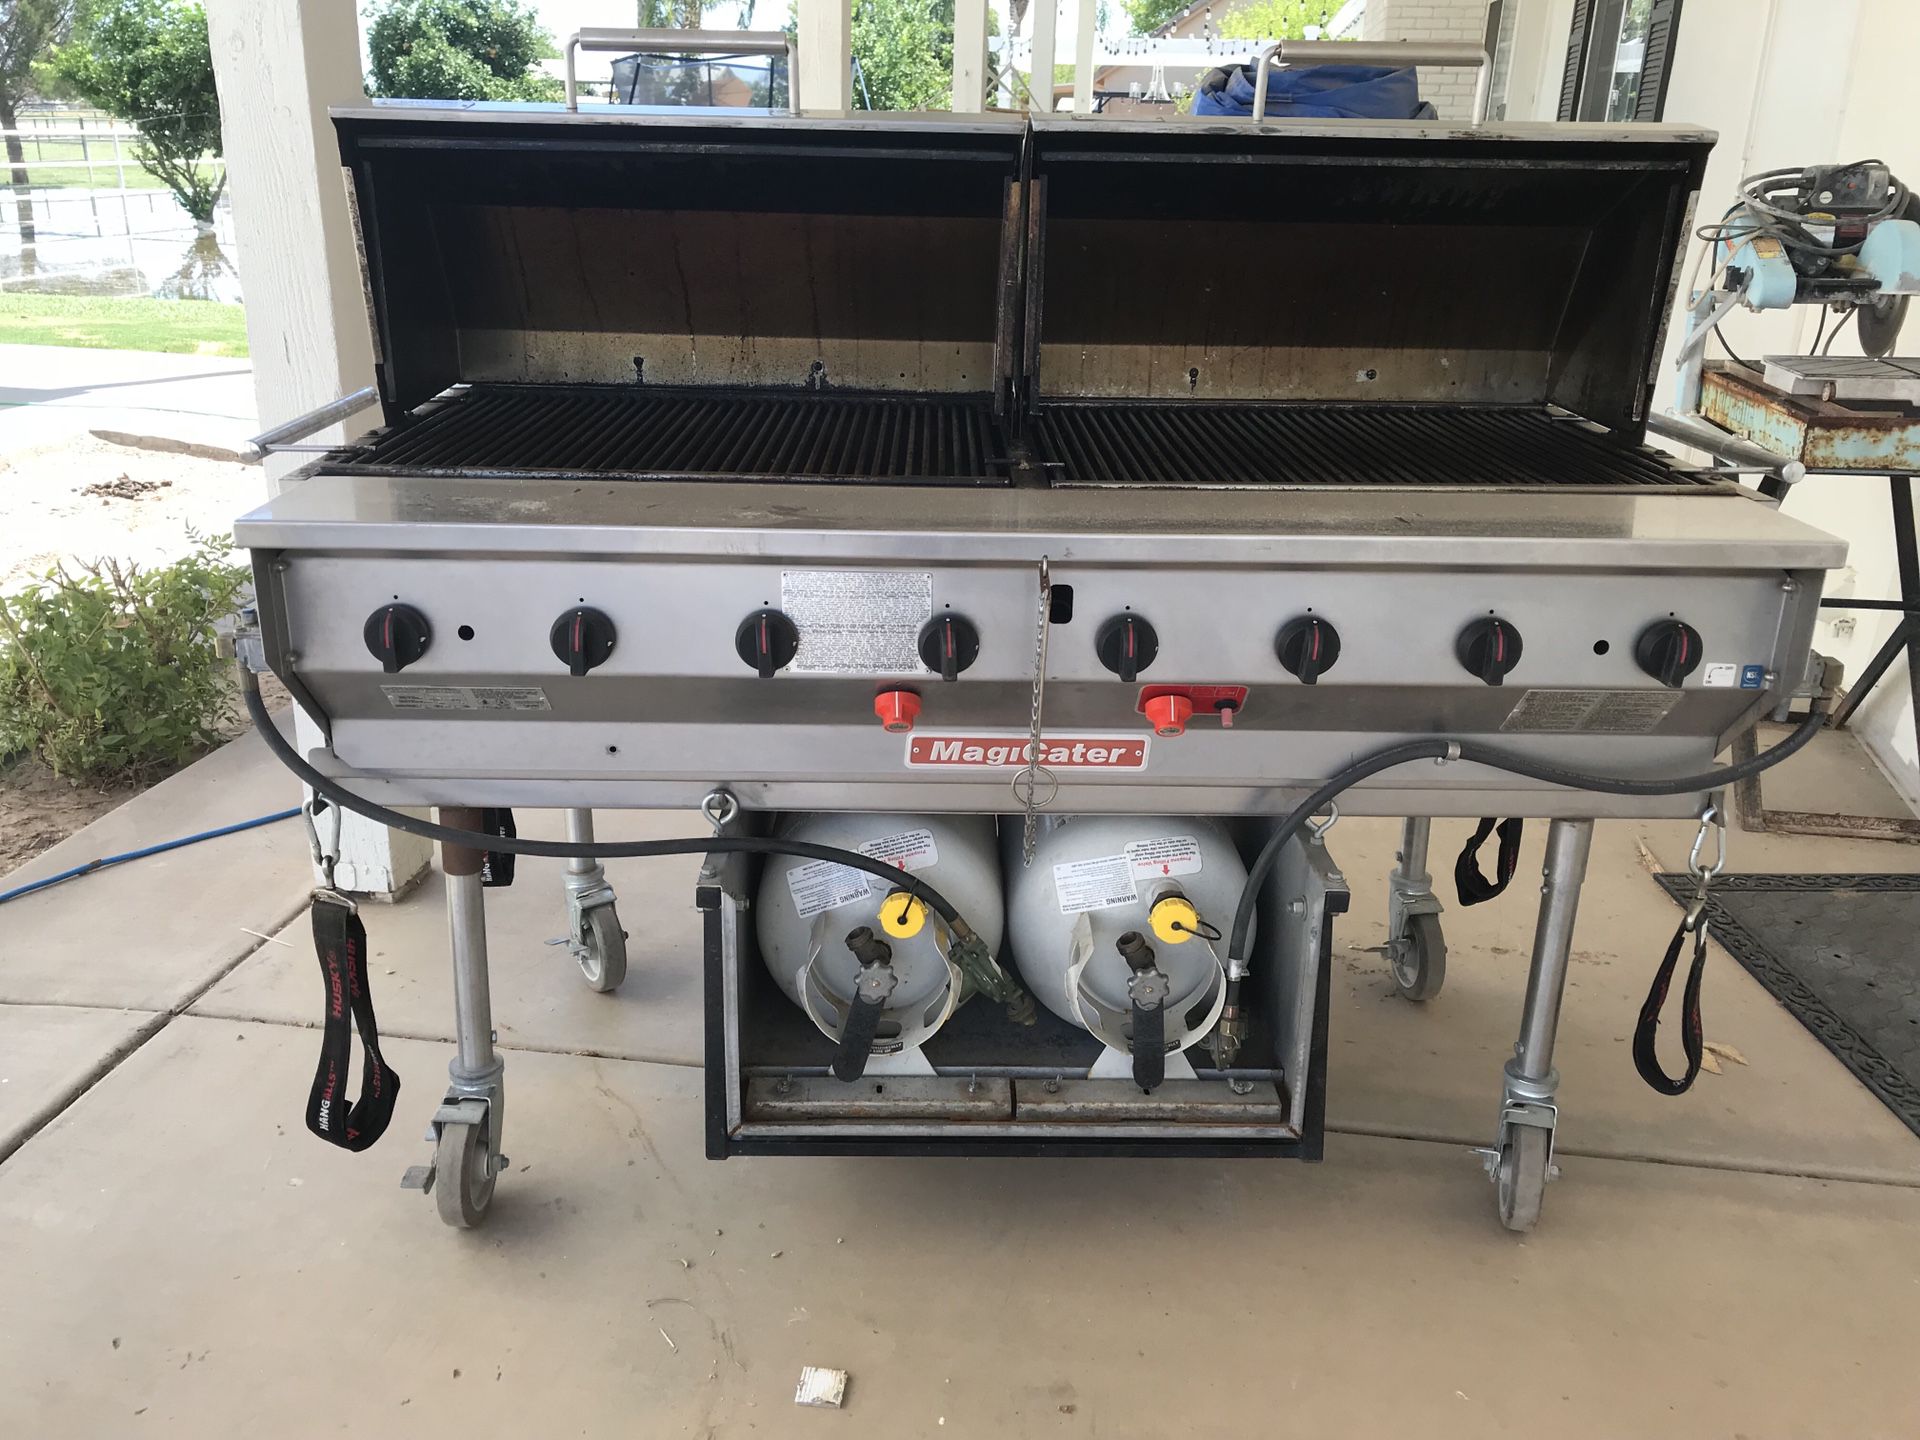 Magicater BBQ grill. Professional 60”wide 24” deep